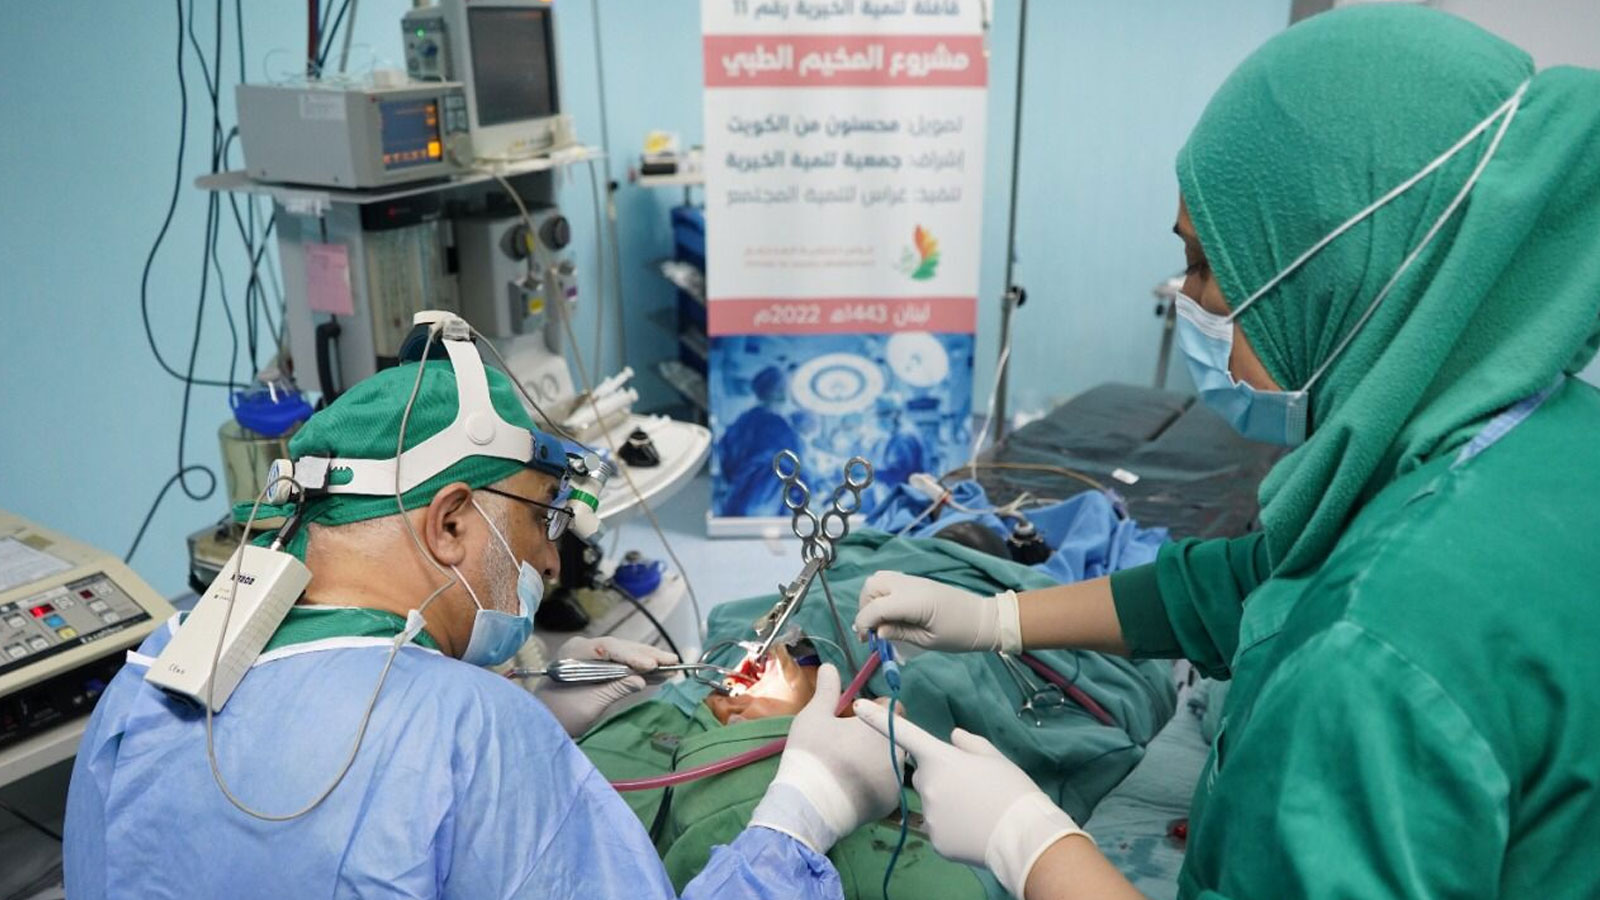 Kuwaiti medical team conducted a small operation on a Syrian migrant in northern Lebanon